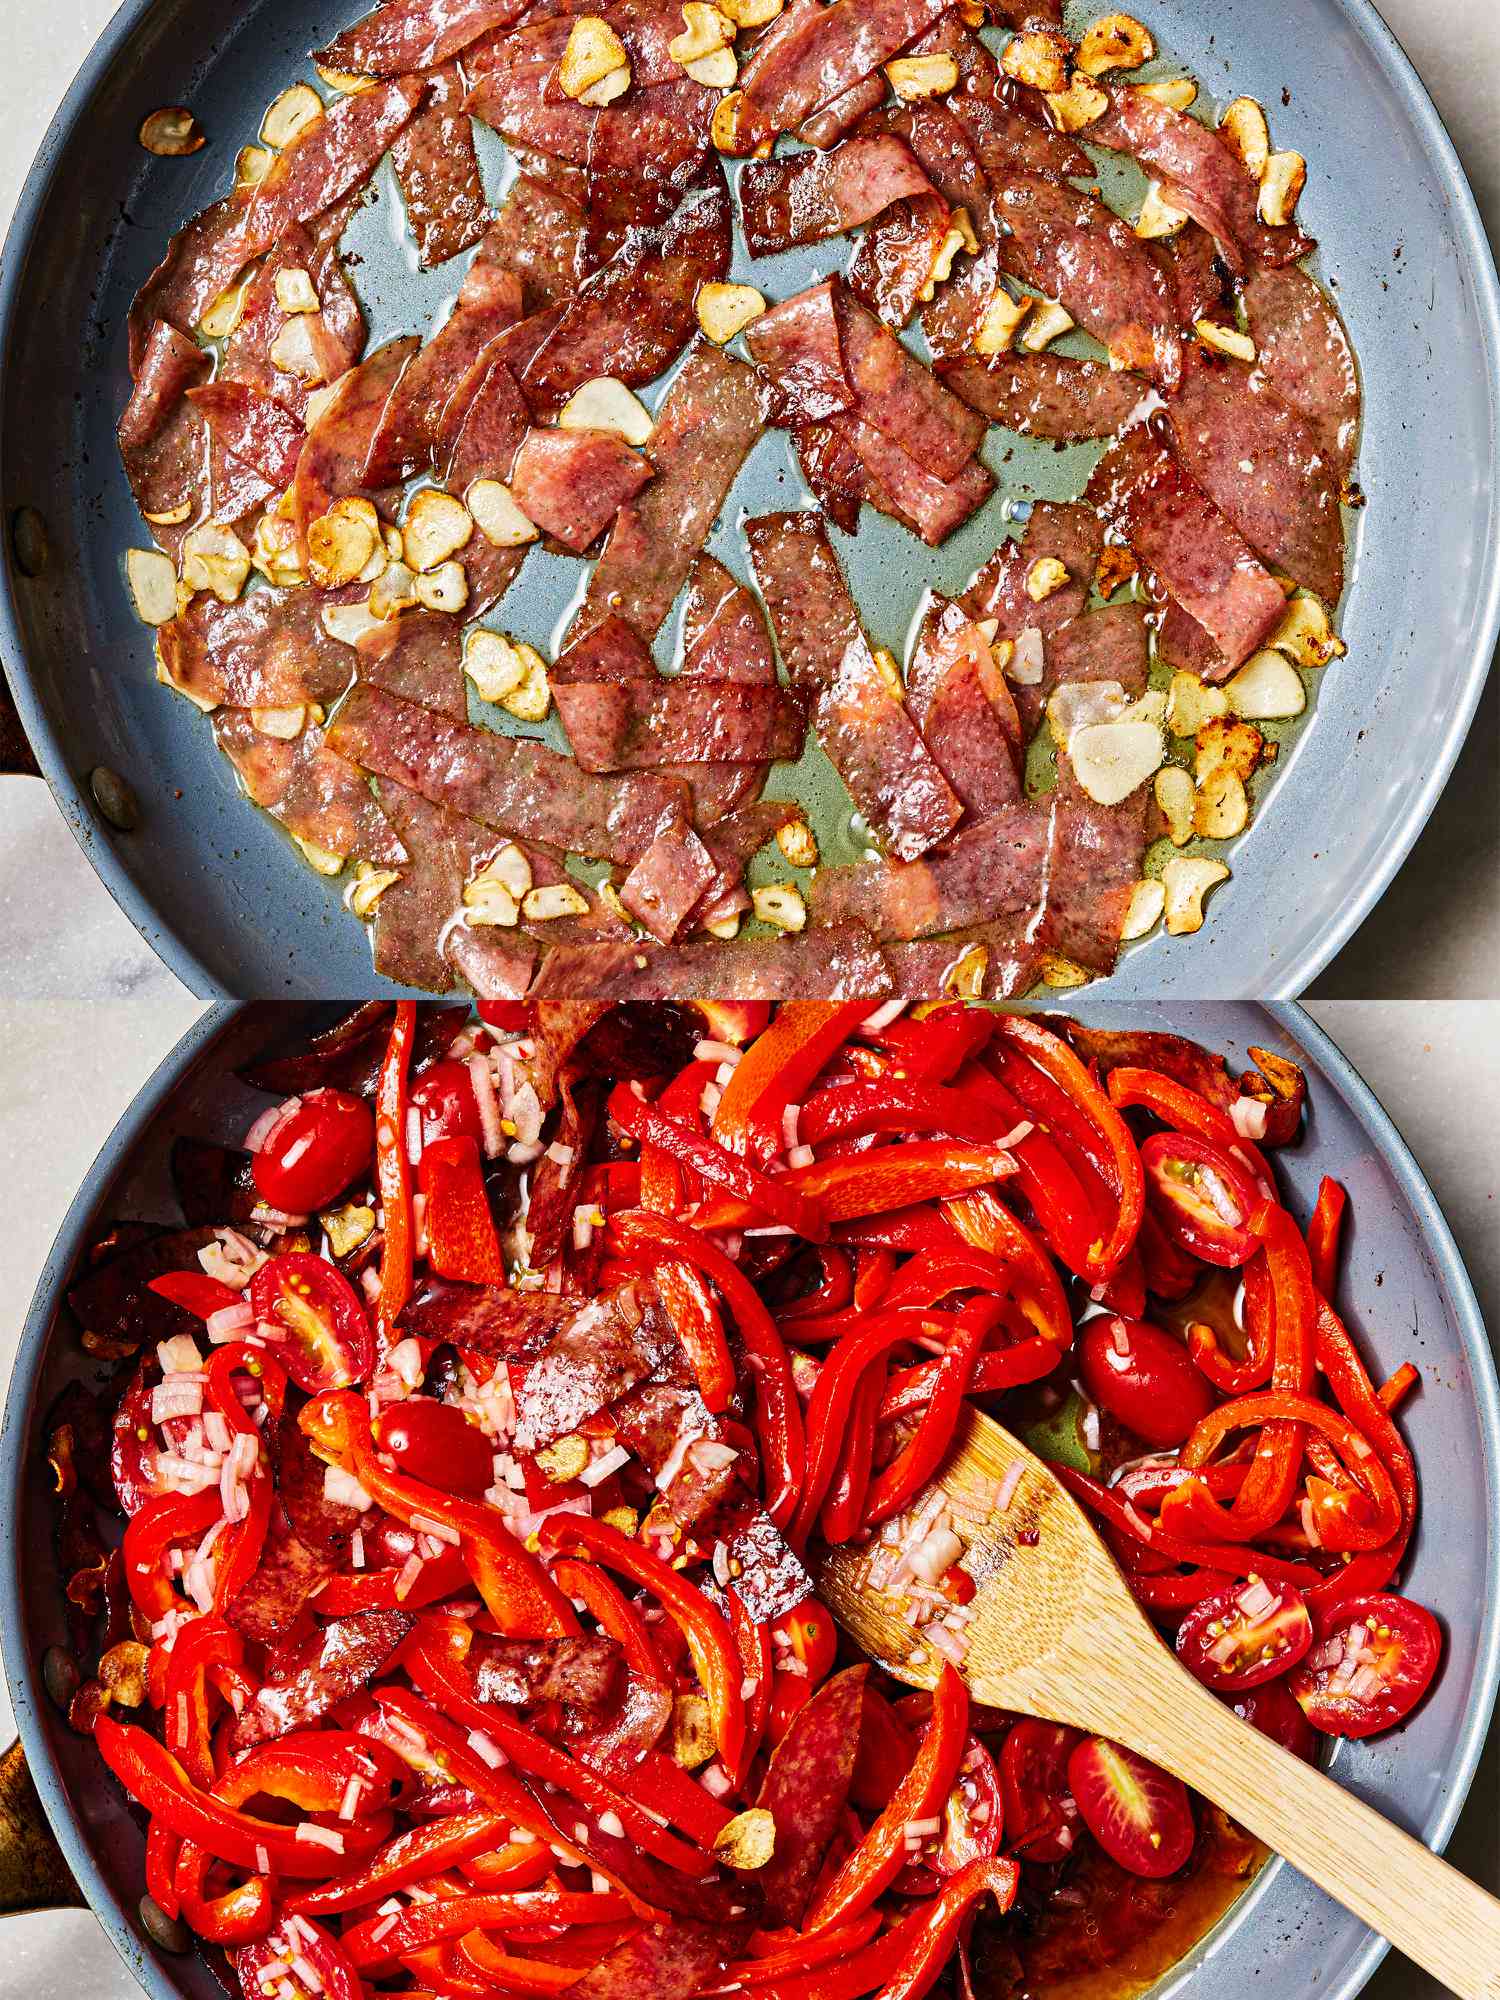 Two image collage of meat and garlic cooking in a pan and tomato-pepper mixture added to it